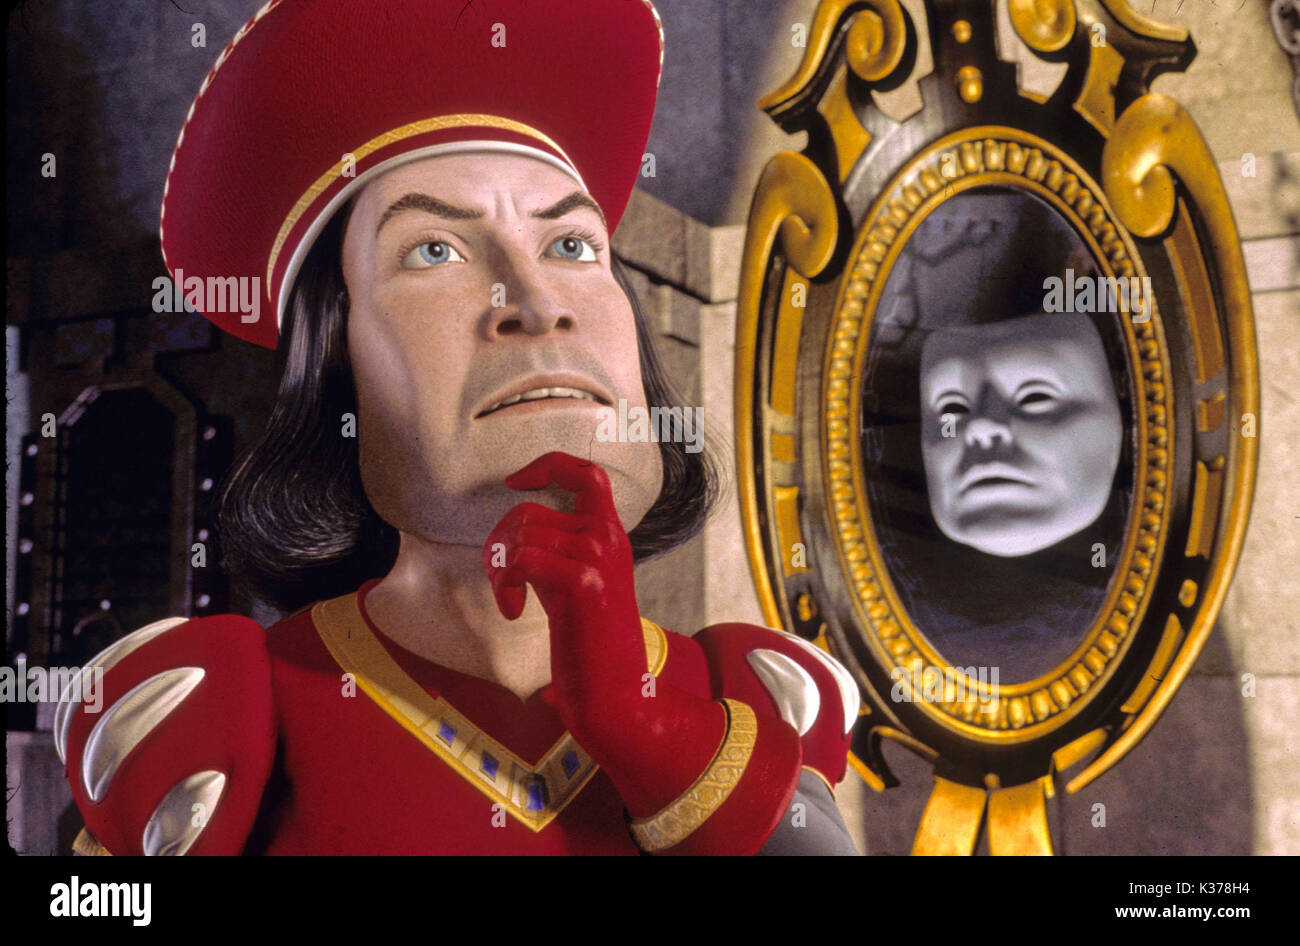 SHREK DREAMWORKS SKG Picture from the Ronald Grant Archive SHREK DREAMWORKS  SKG Date: 2001 Stock Photo - Alamy